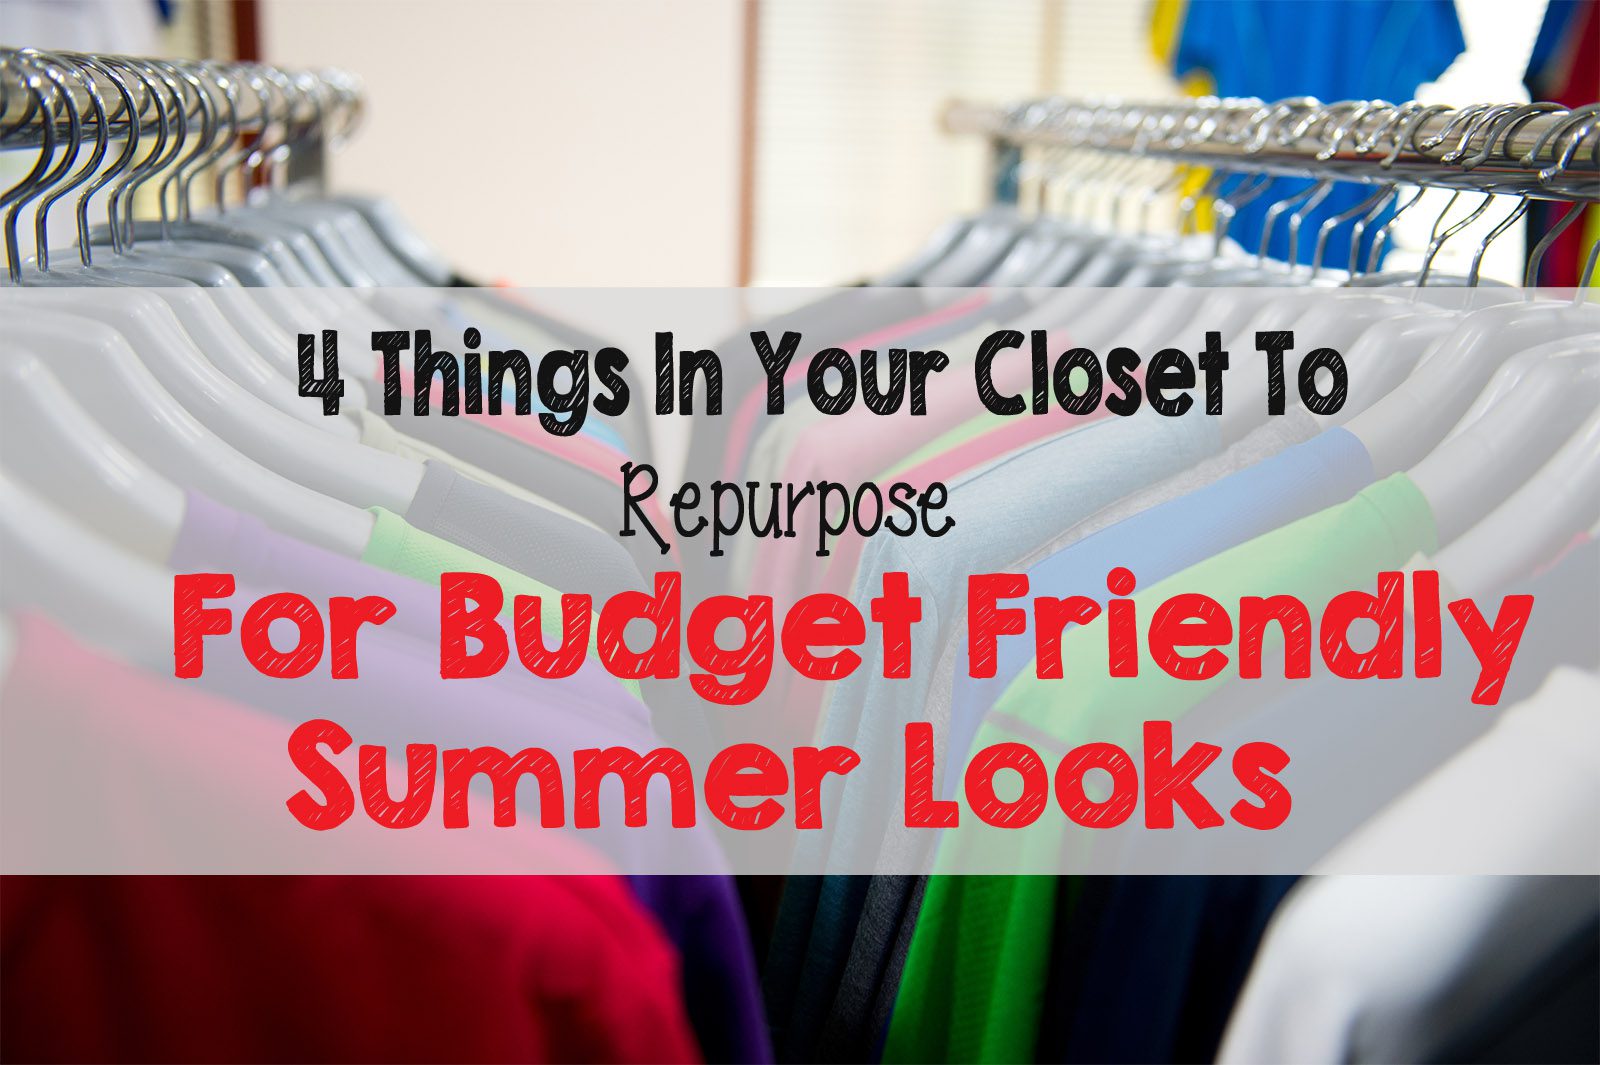 4 Things In Your Closet To Repurpose for Budget Friendly Summer Looks